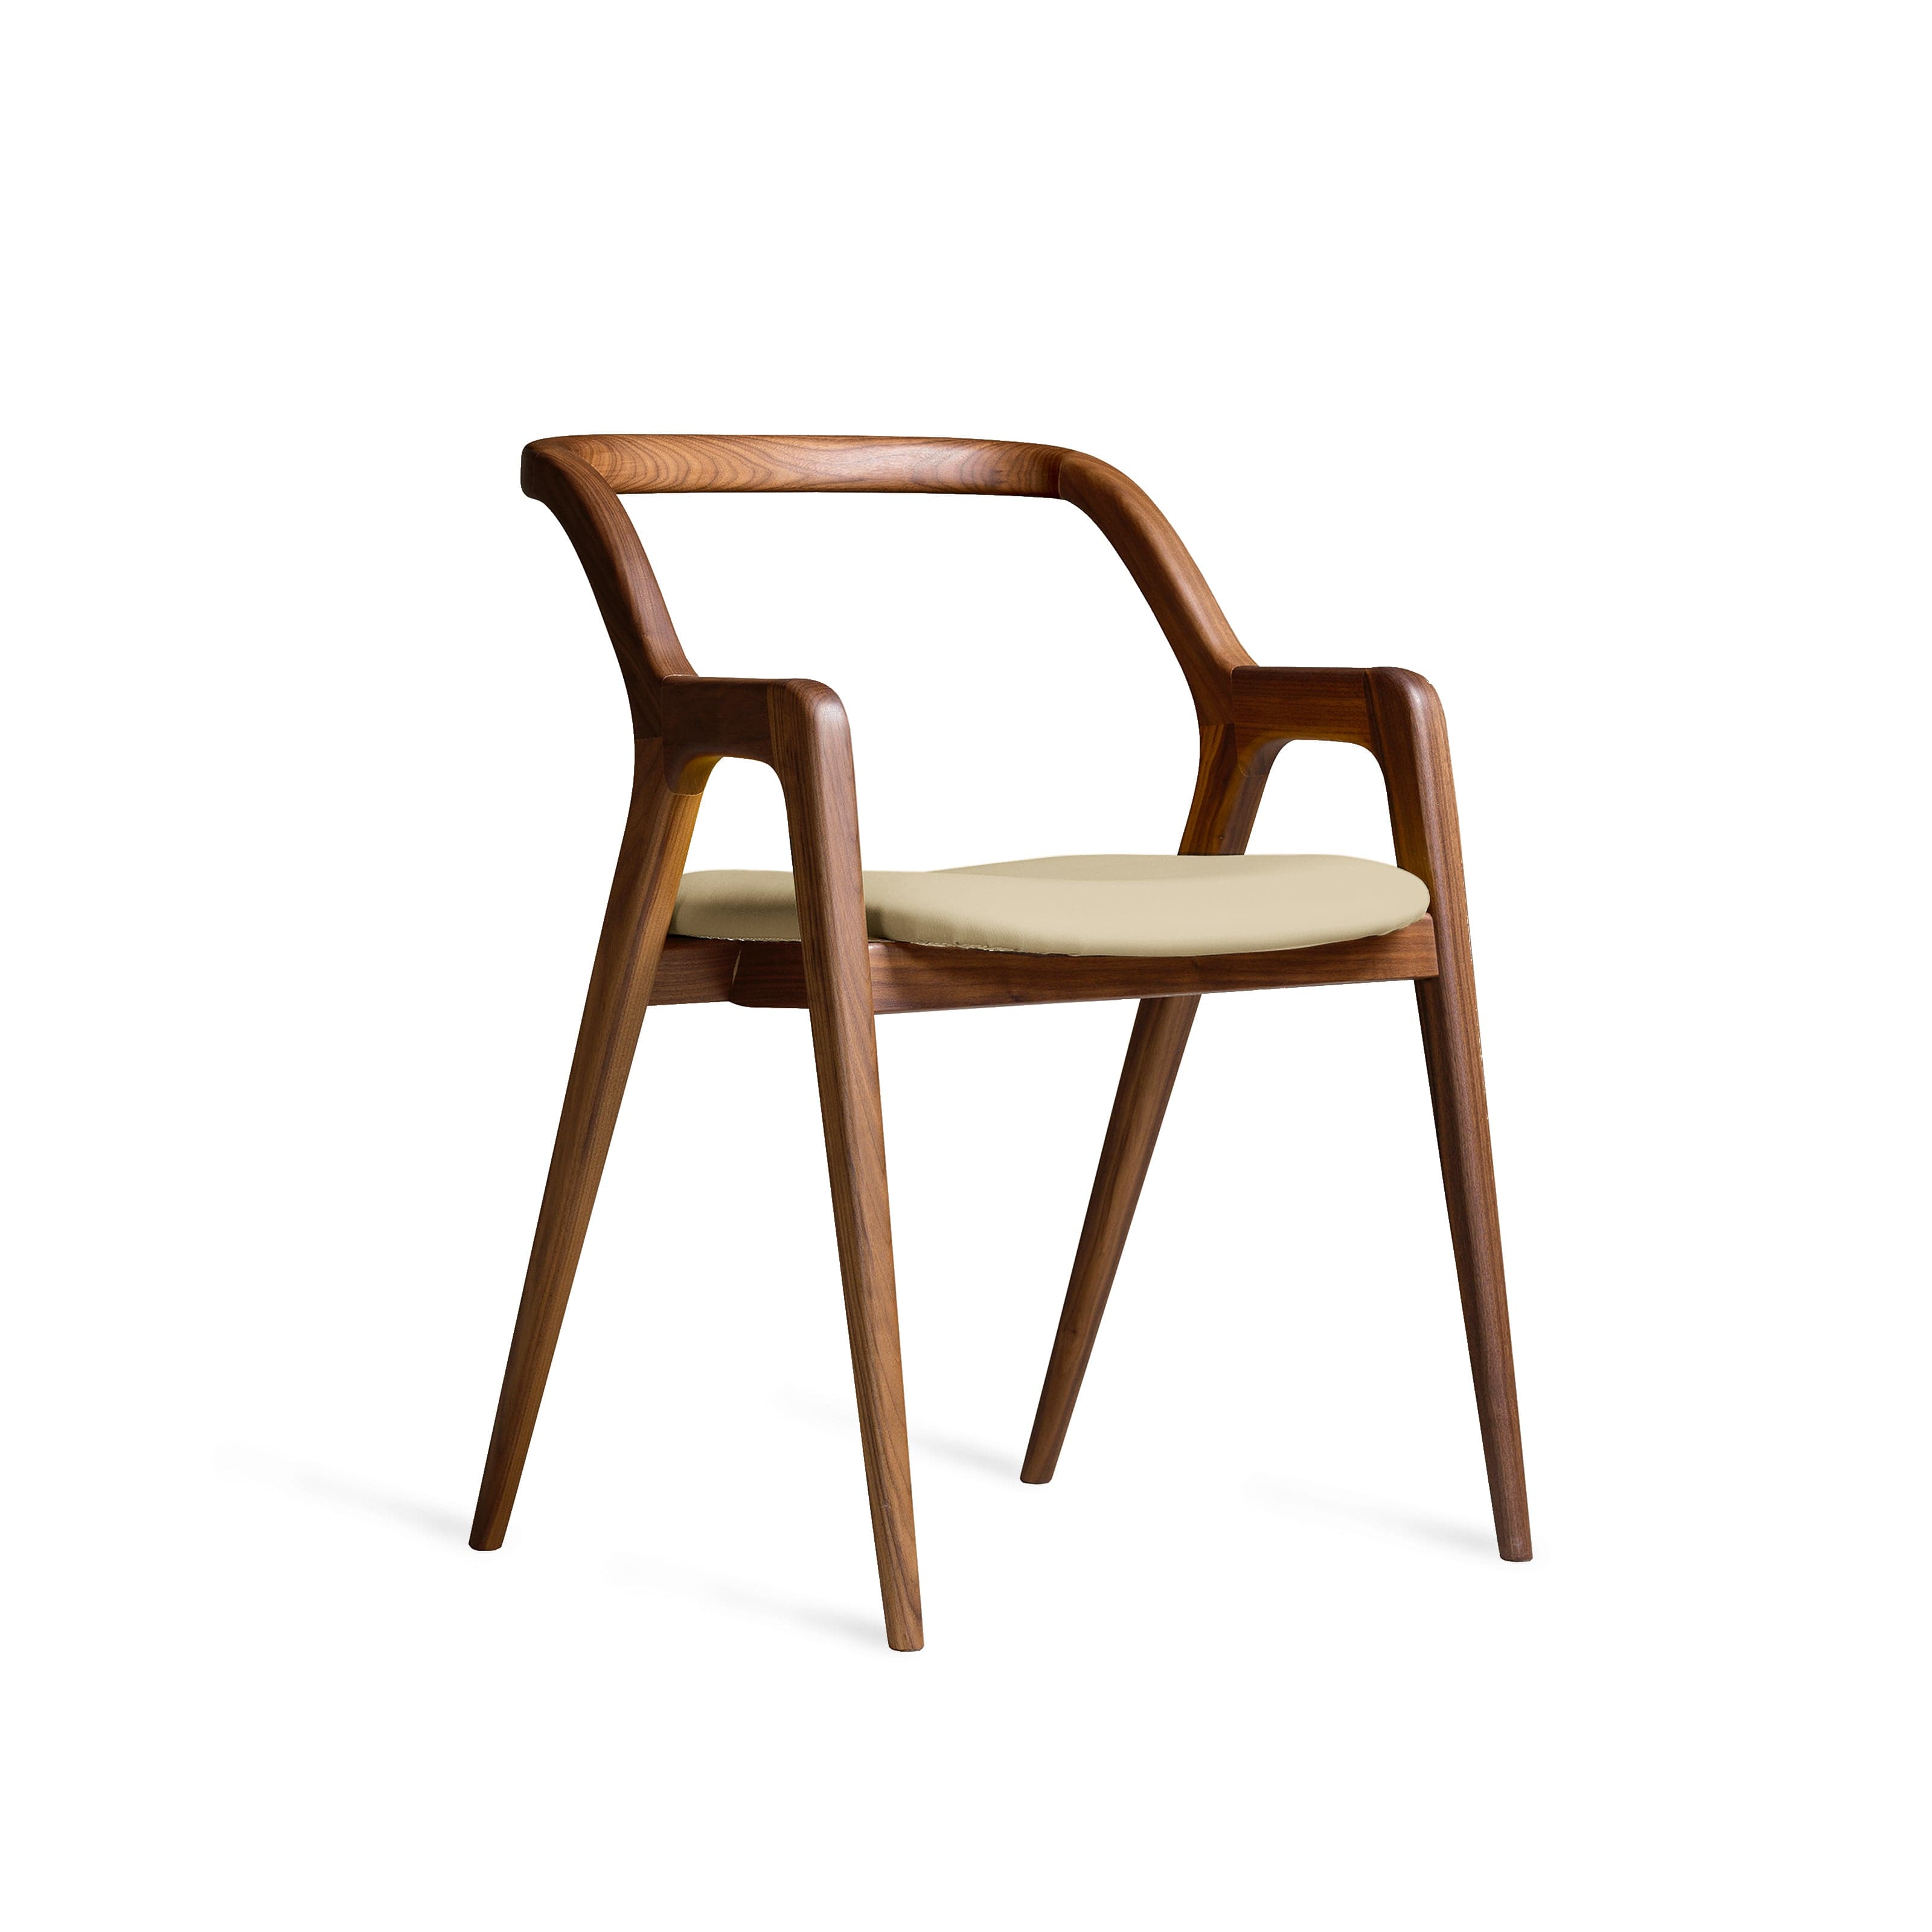 Design Chair, Design furniture, Made in Italy, Getlucky